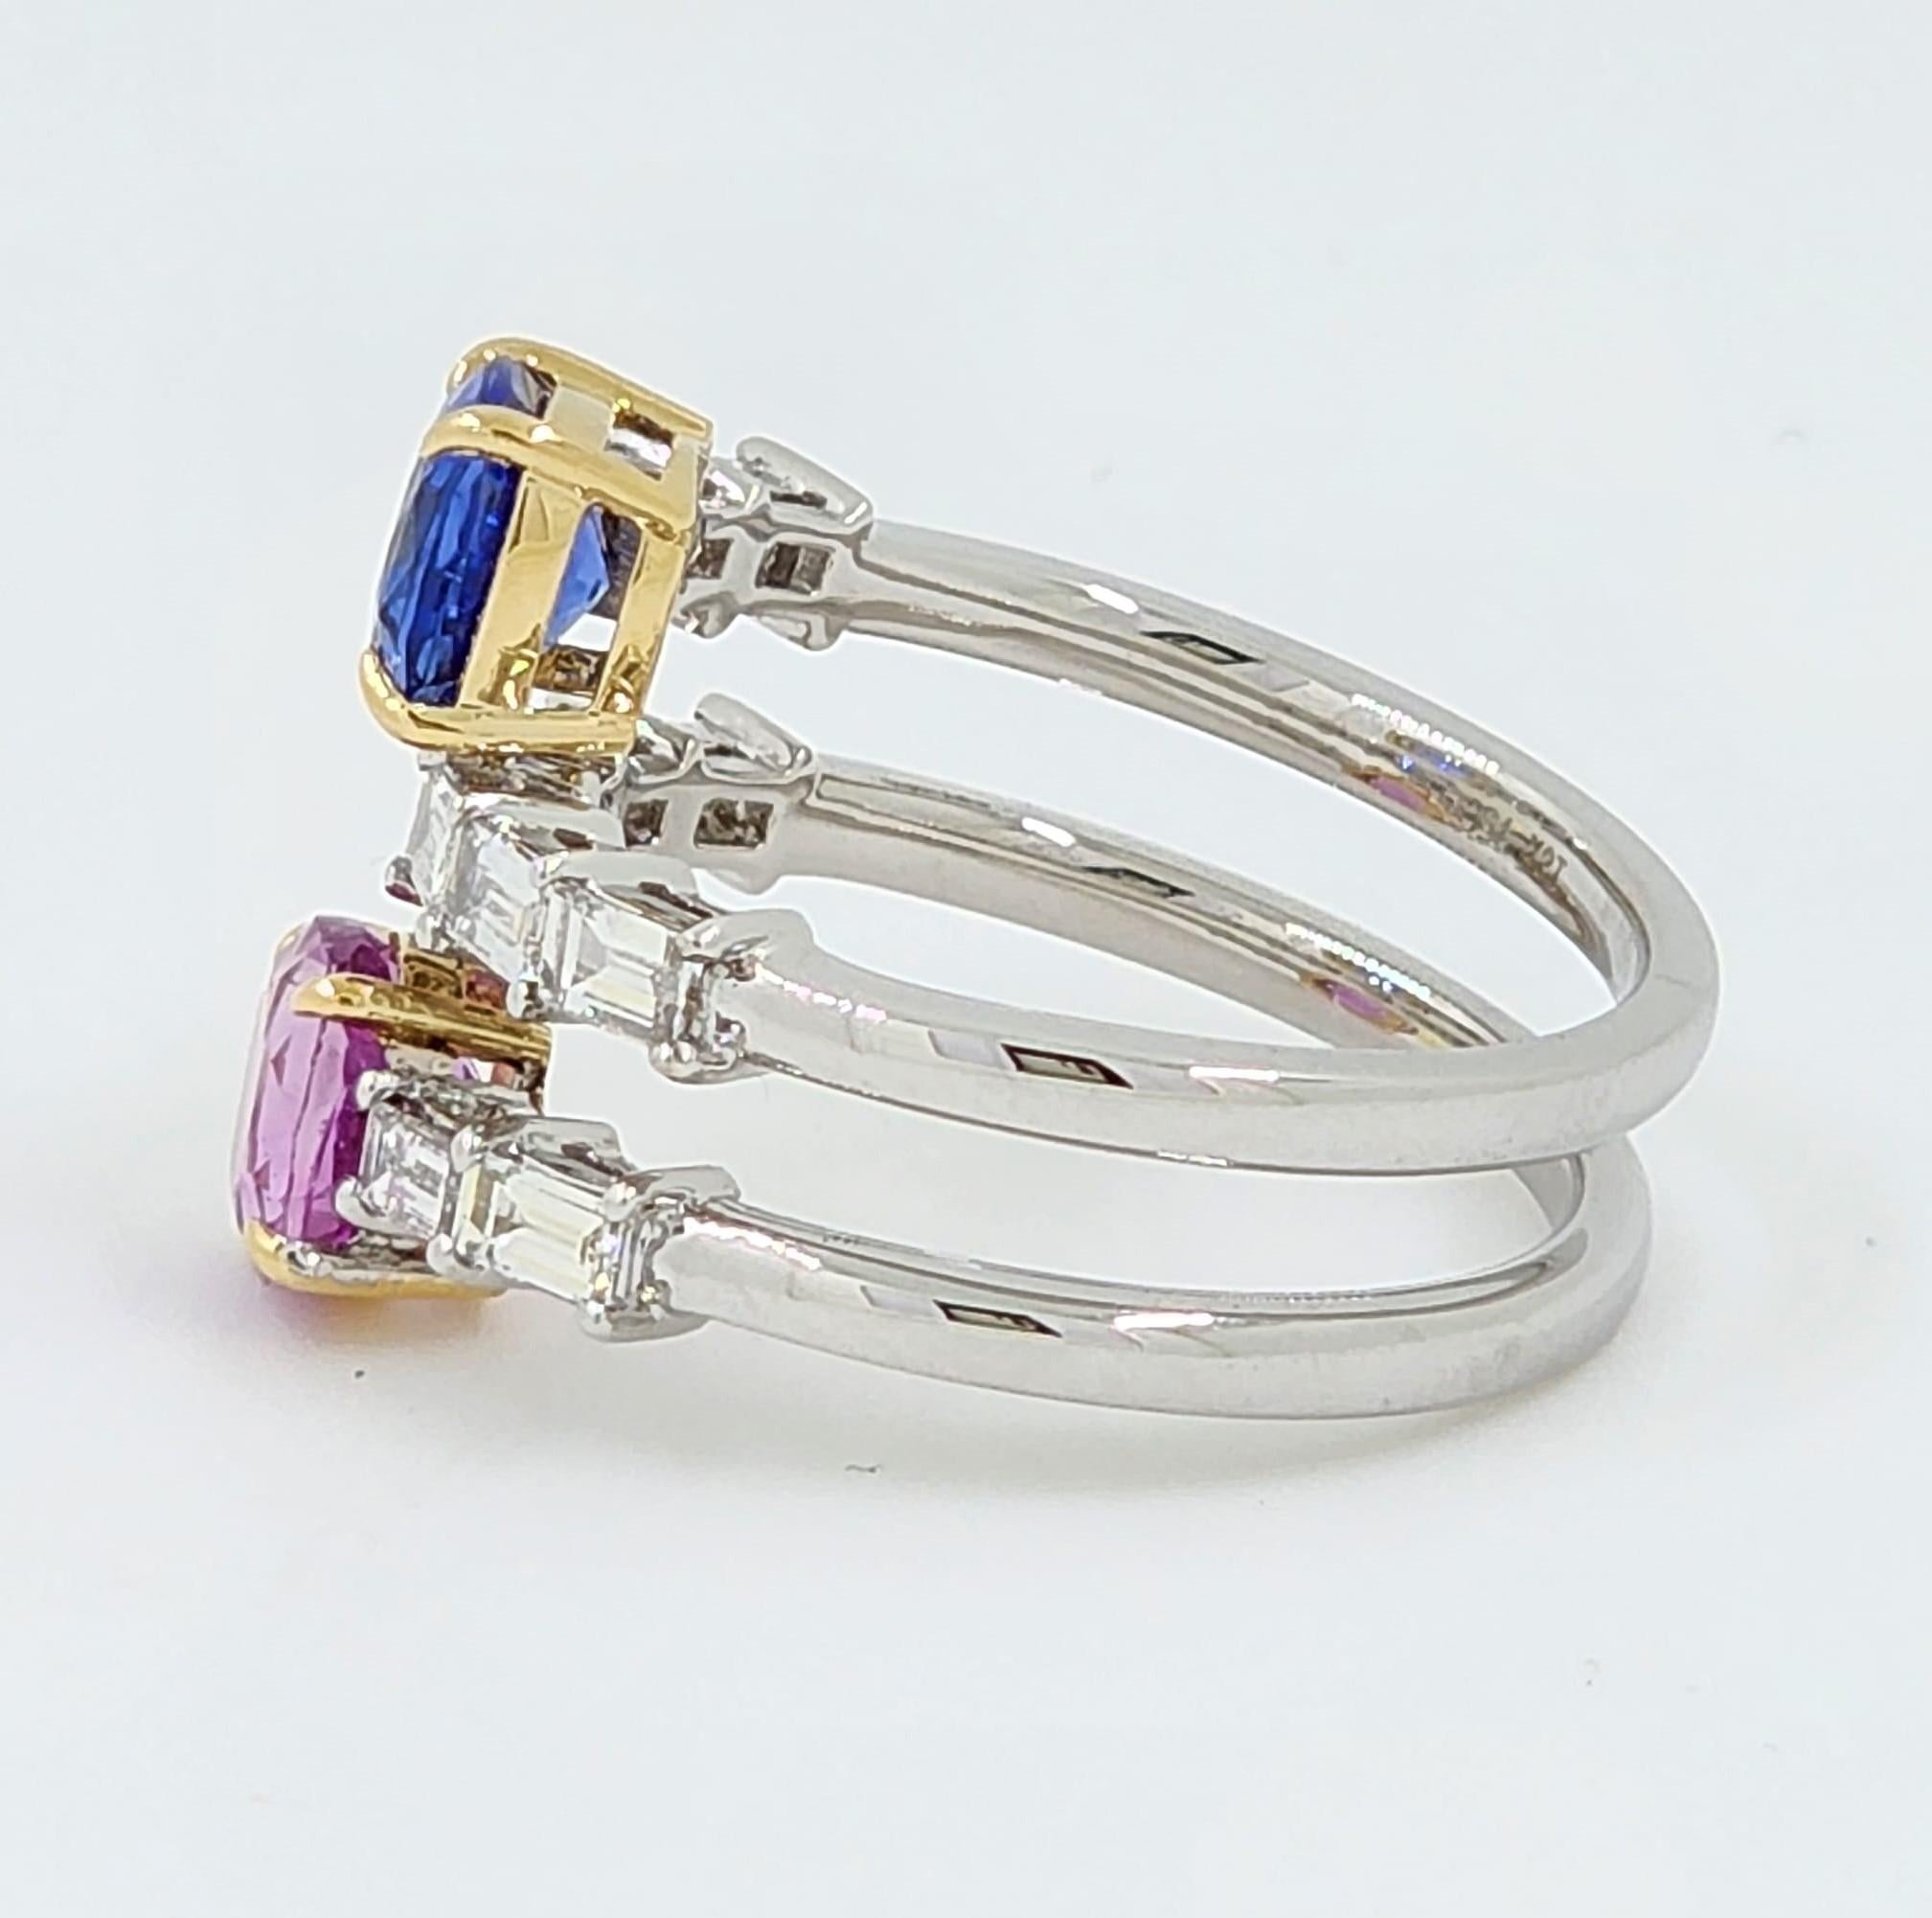 Contemporary 3.45 Carat Blue and Pink Sapphire Toi Et Moi Diamond Ring in 18 Karat White Gold For Sale